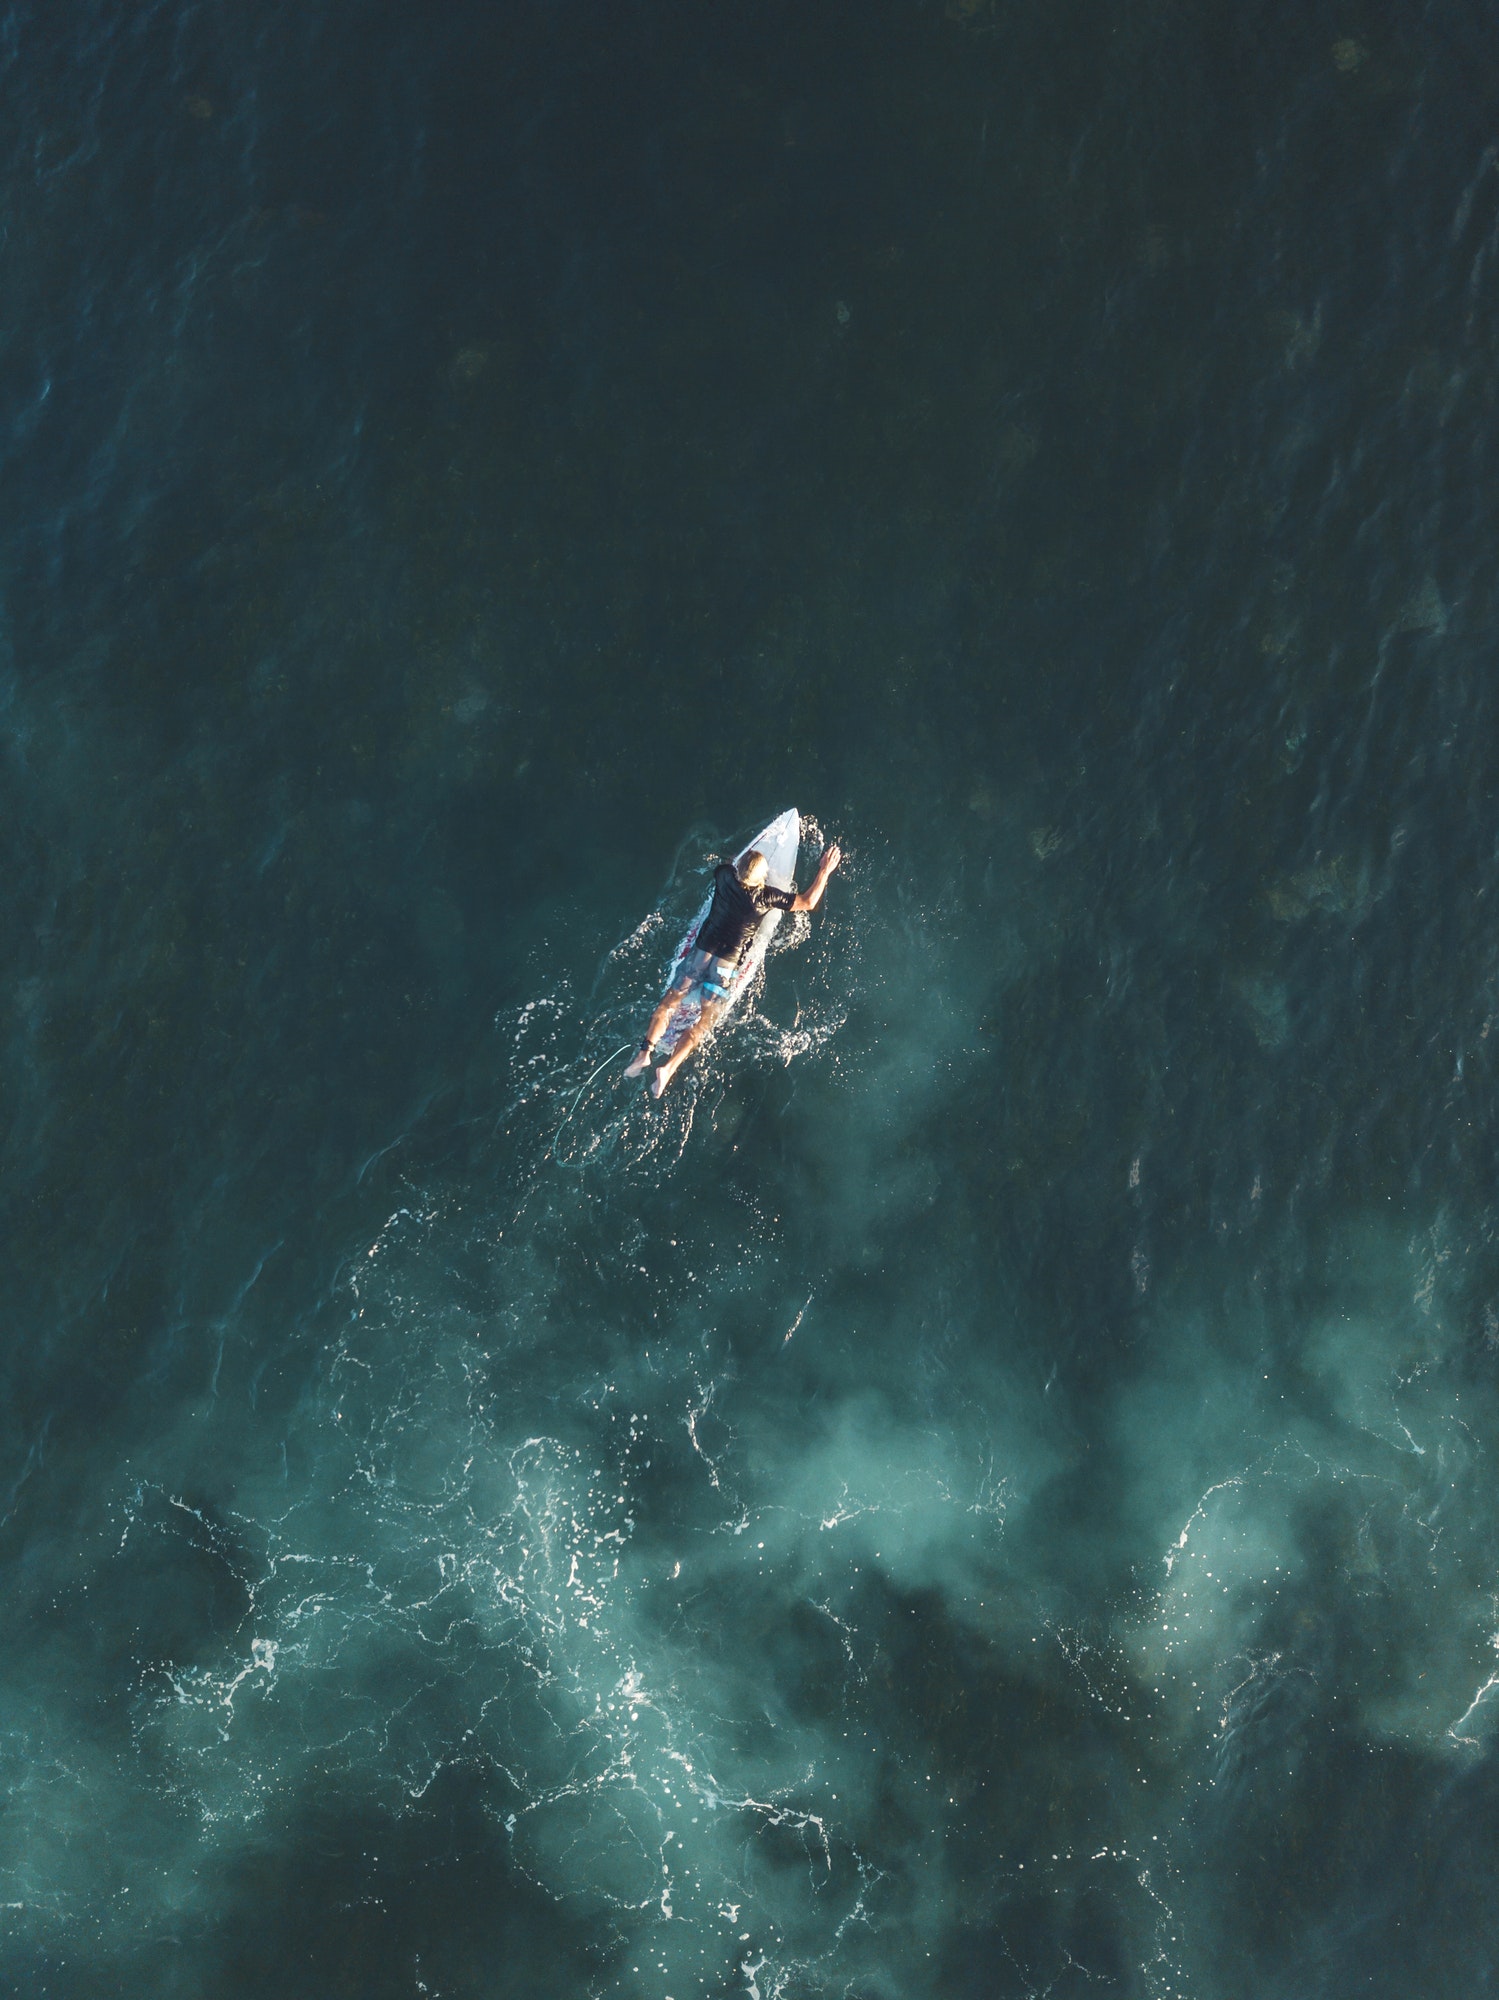 Aerial view of surfer,Bali,Indonesia